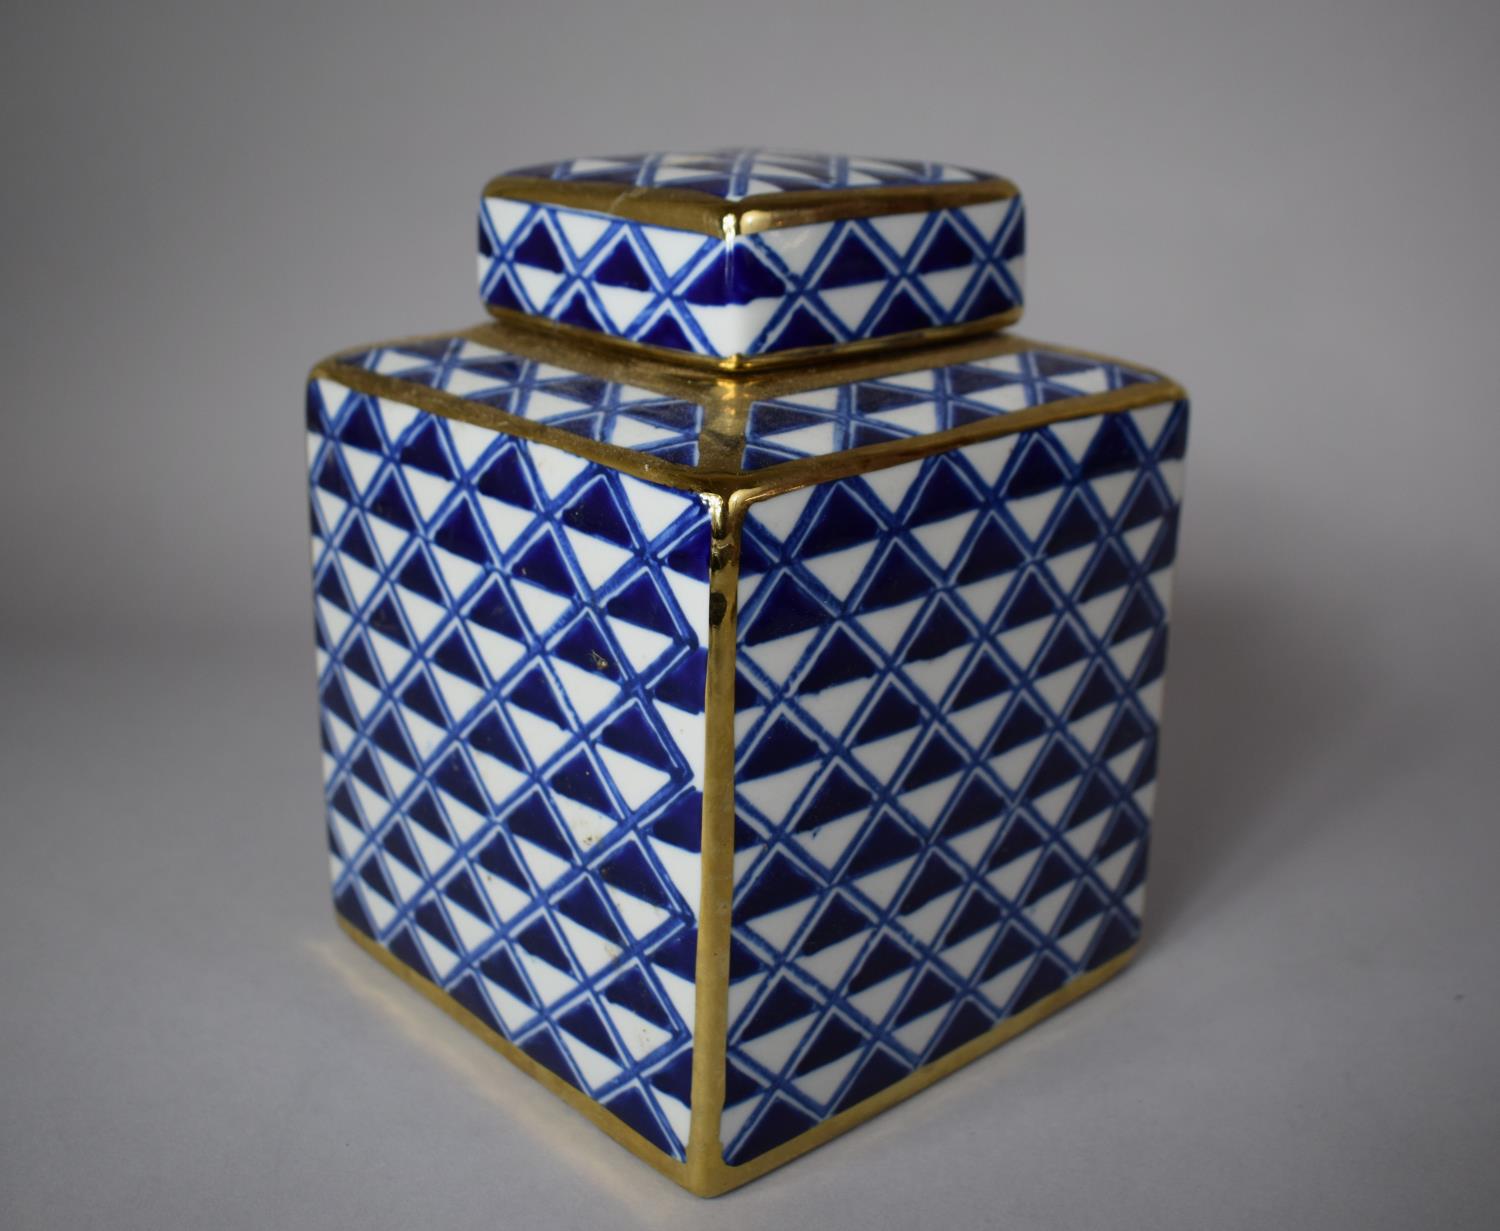 A Blue, White and Gilt Decorated Cubist Lidded Jar, 20cm High (Lid Glued) - Image 2 of 4